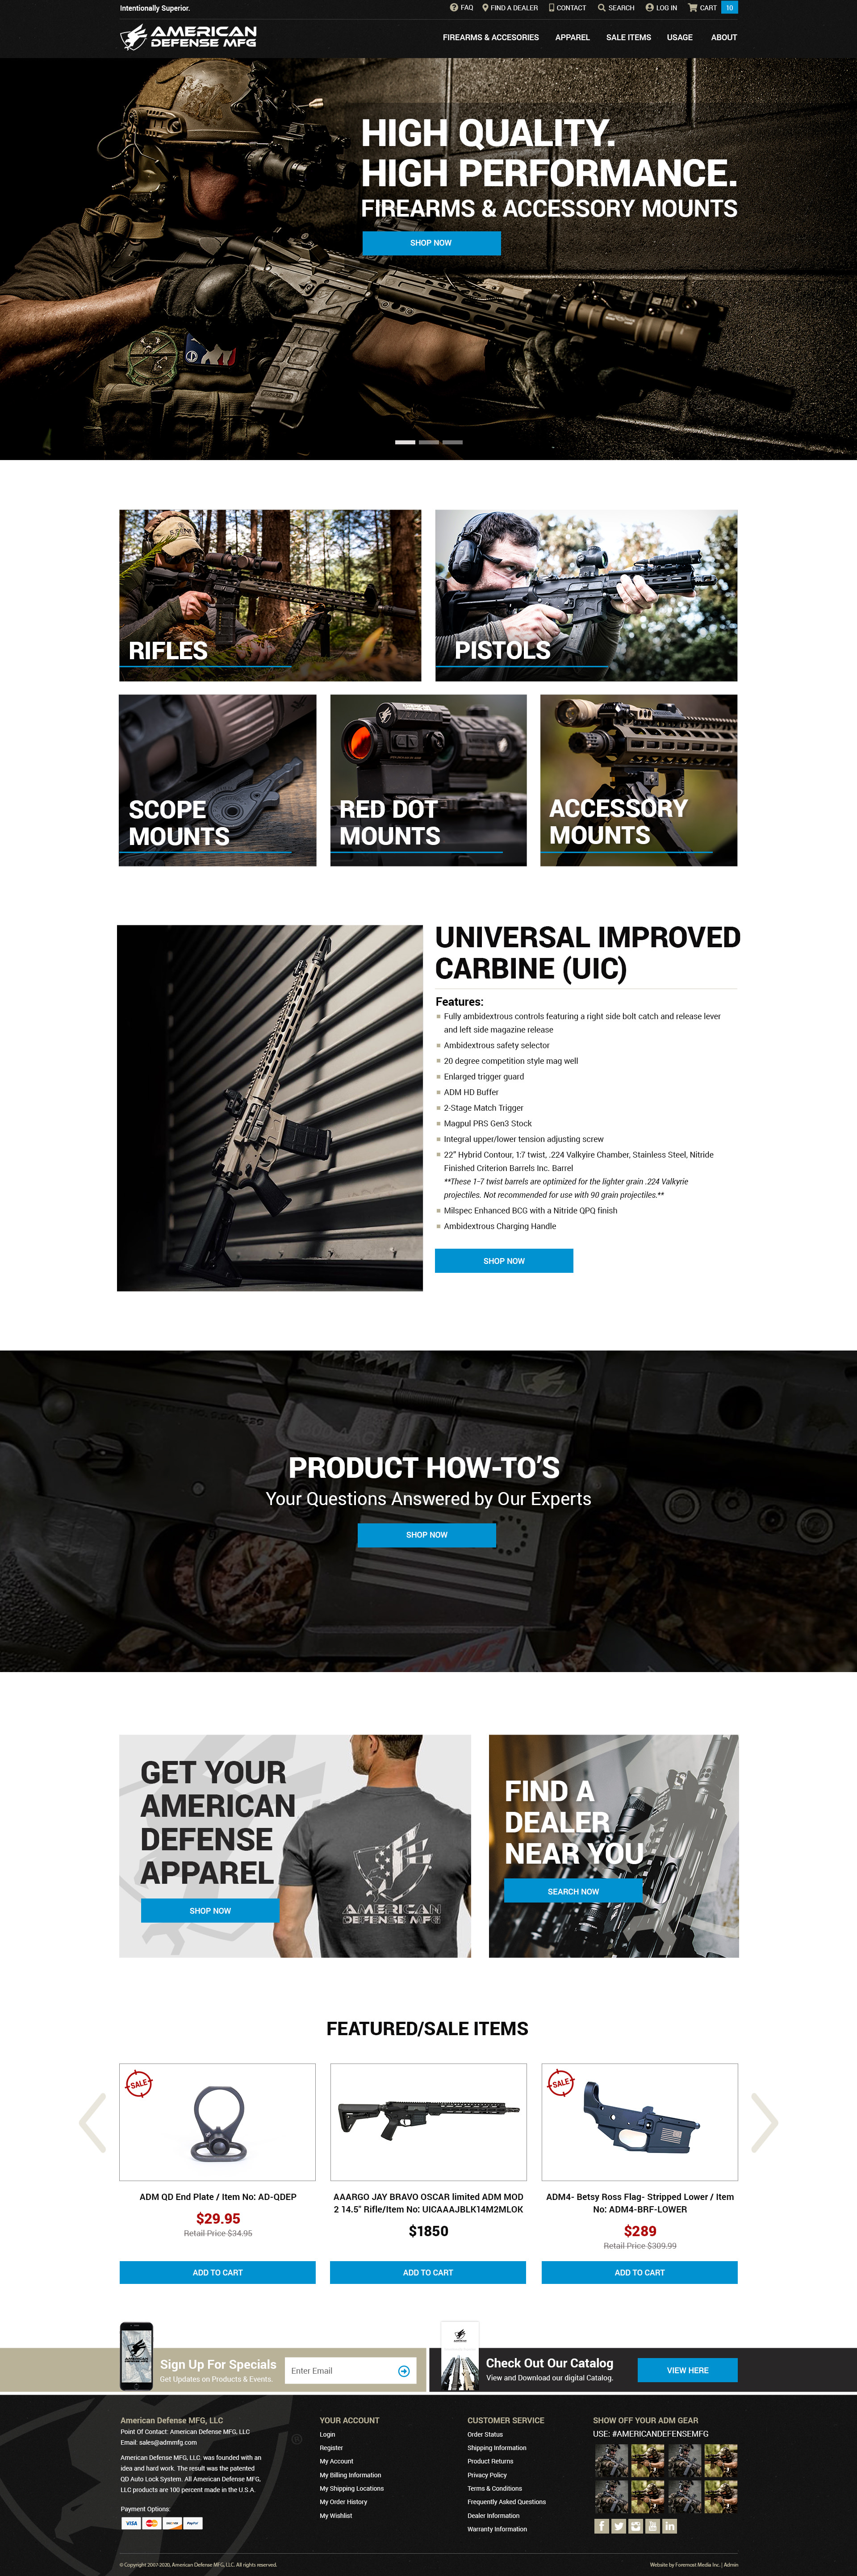 Example of the new and improved nopCommerce website designed by Foremost Media for American Defense Manufacturing